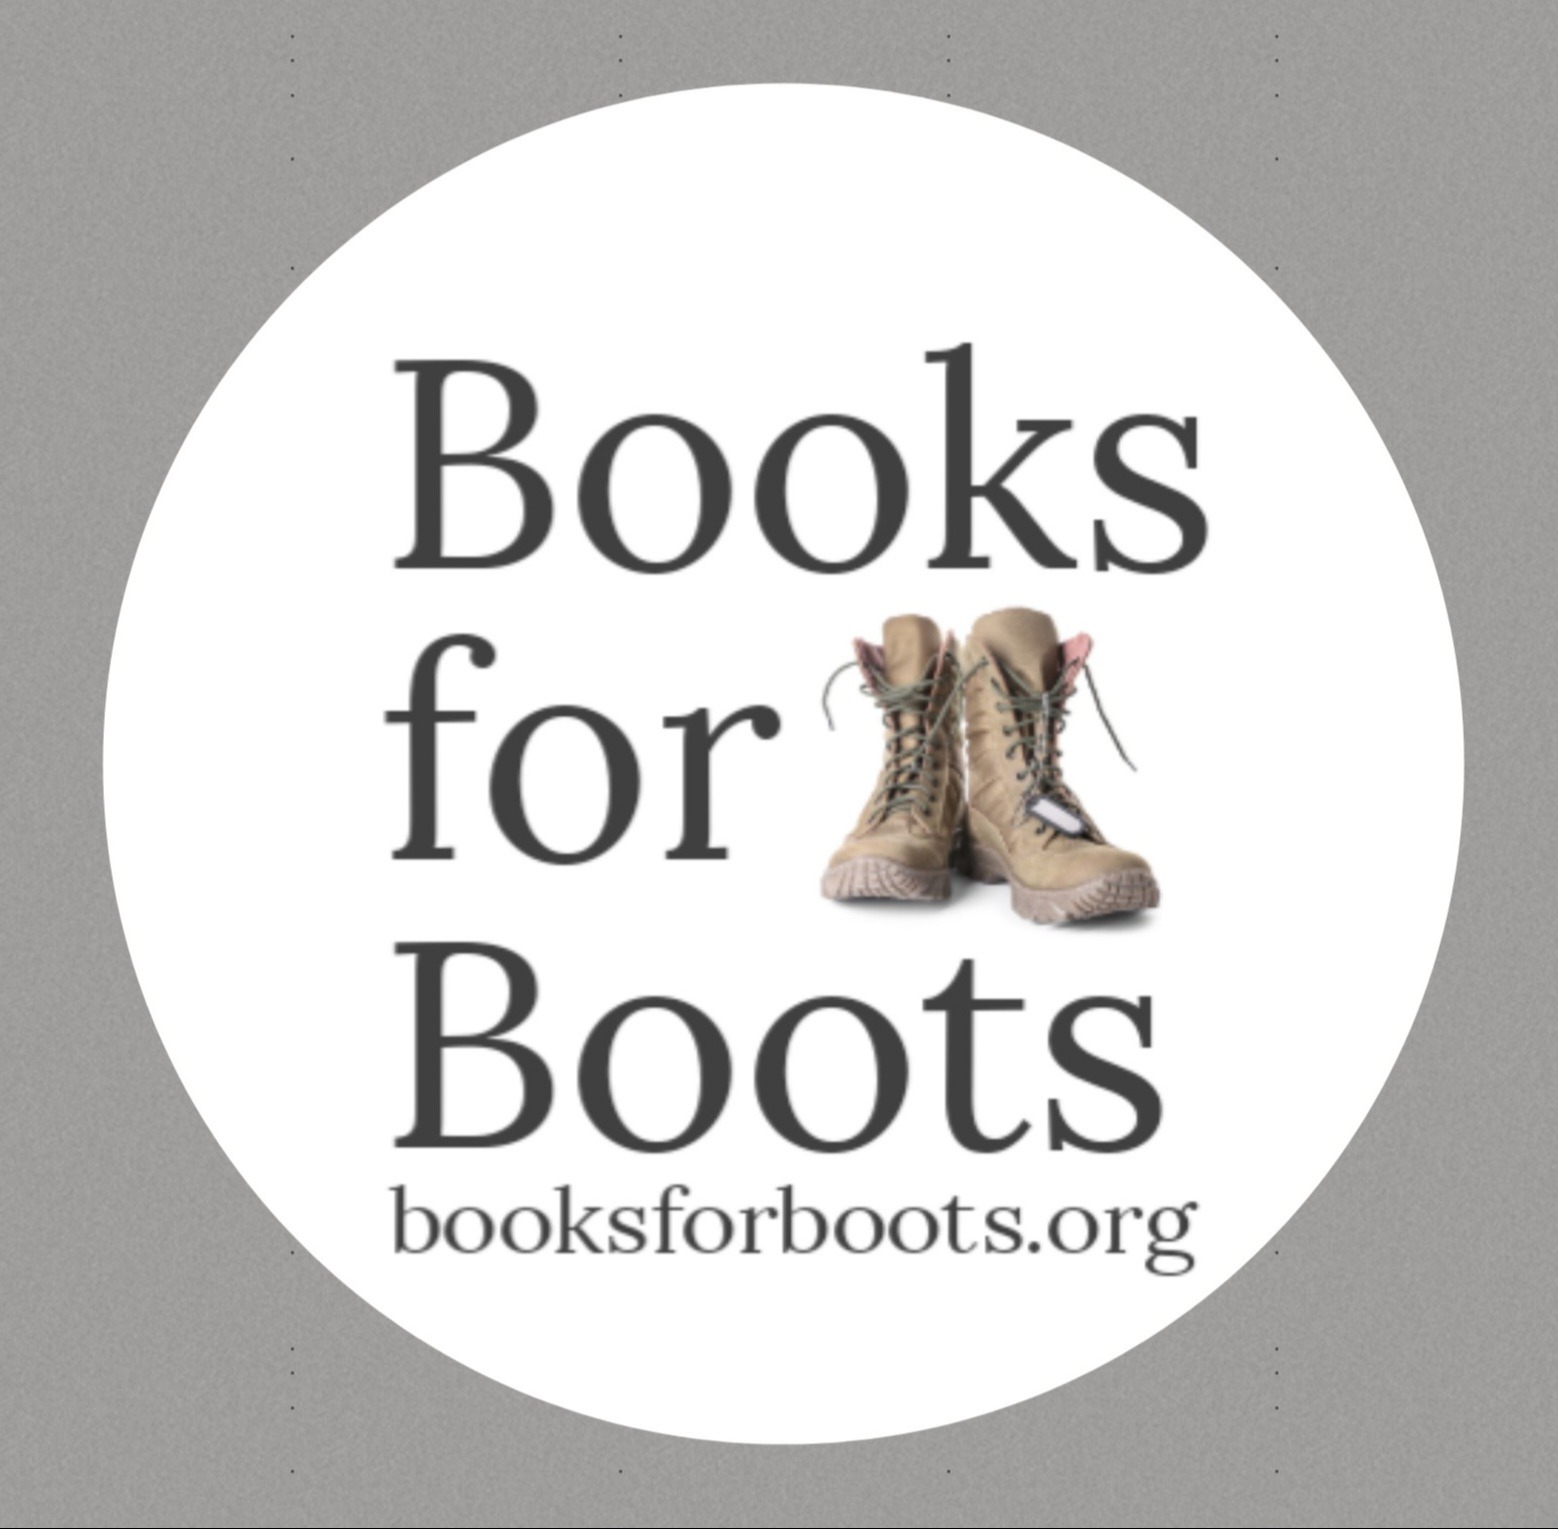 Books for Boots logo